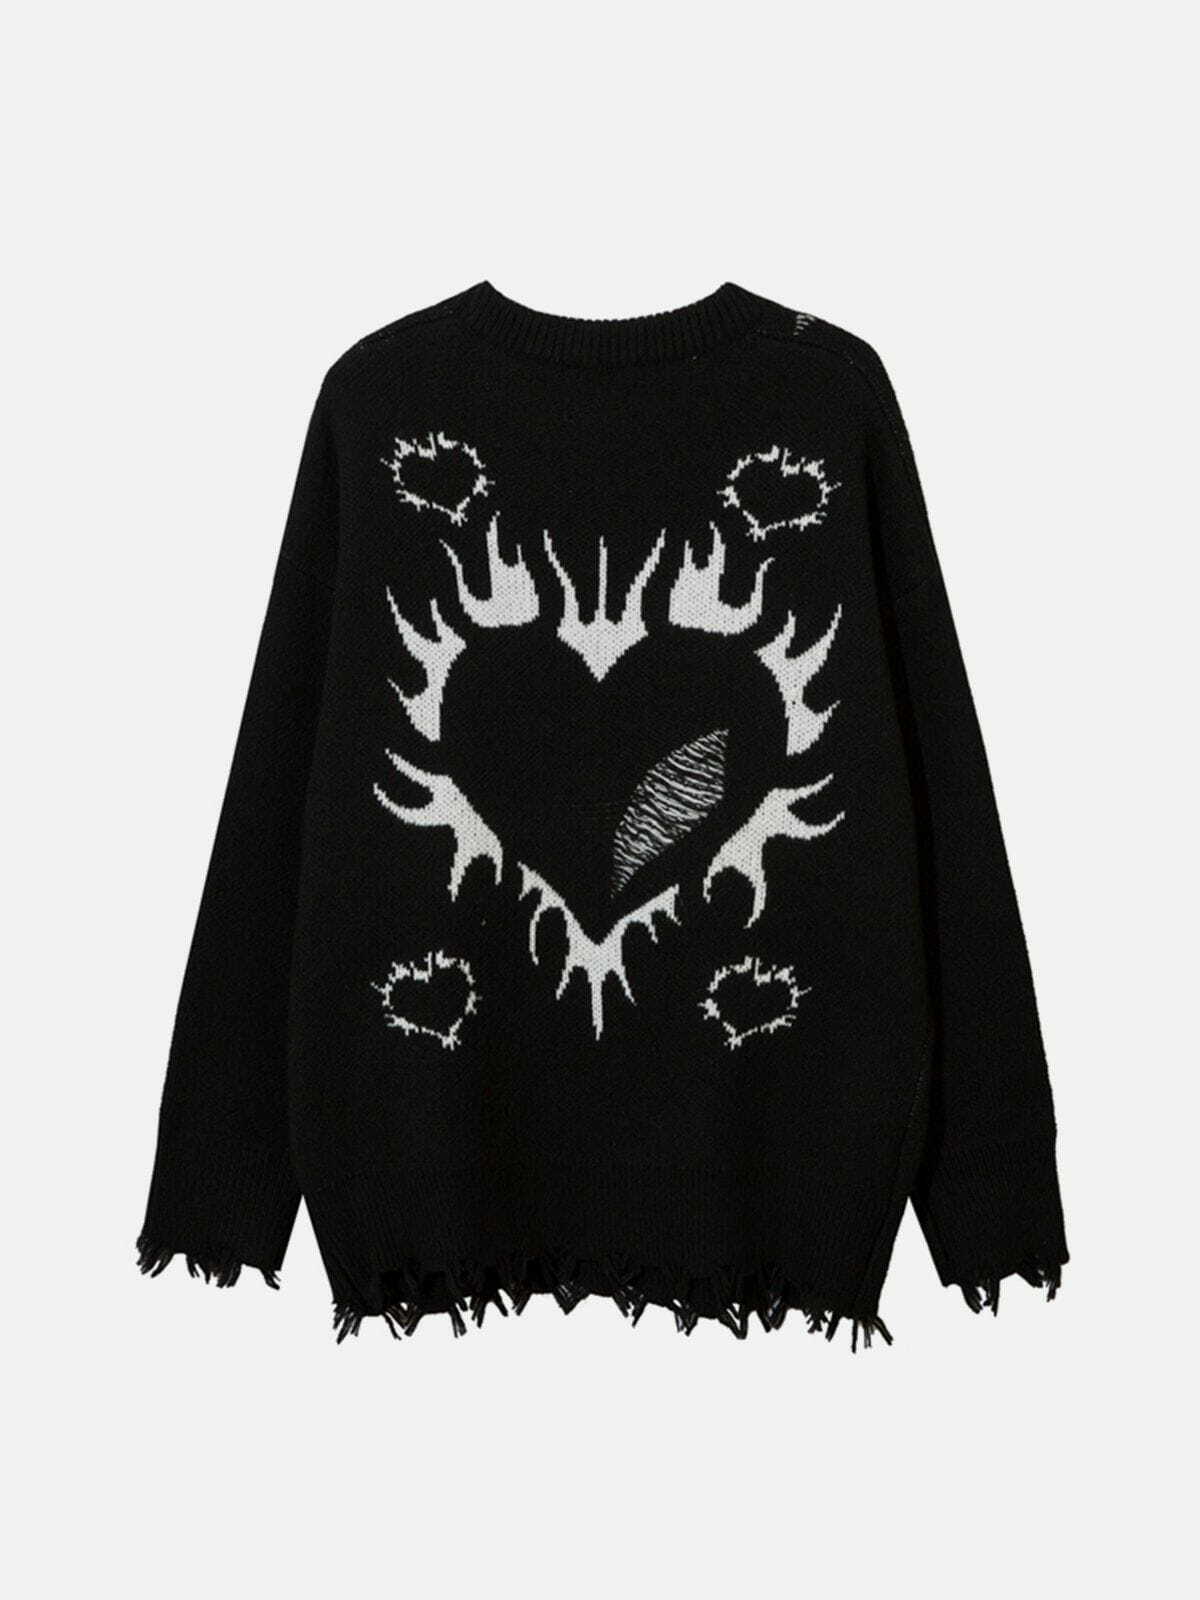 flame heart jacquard sweater edgy retro knitwear chic 4584